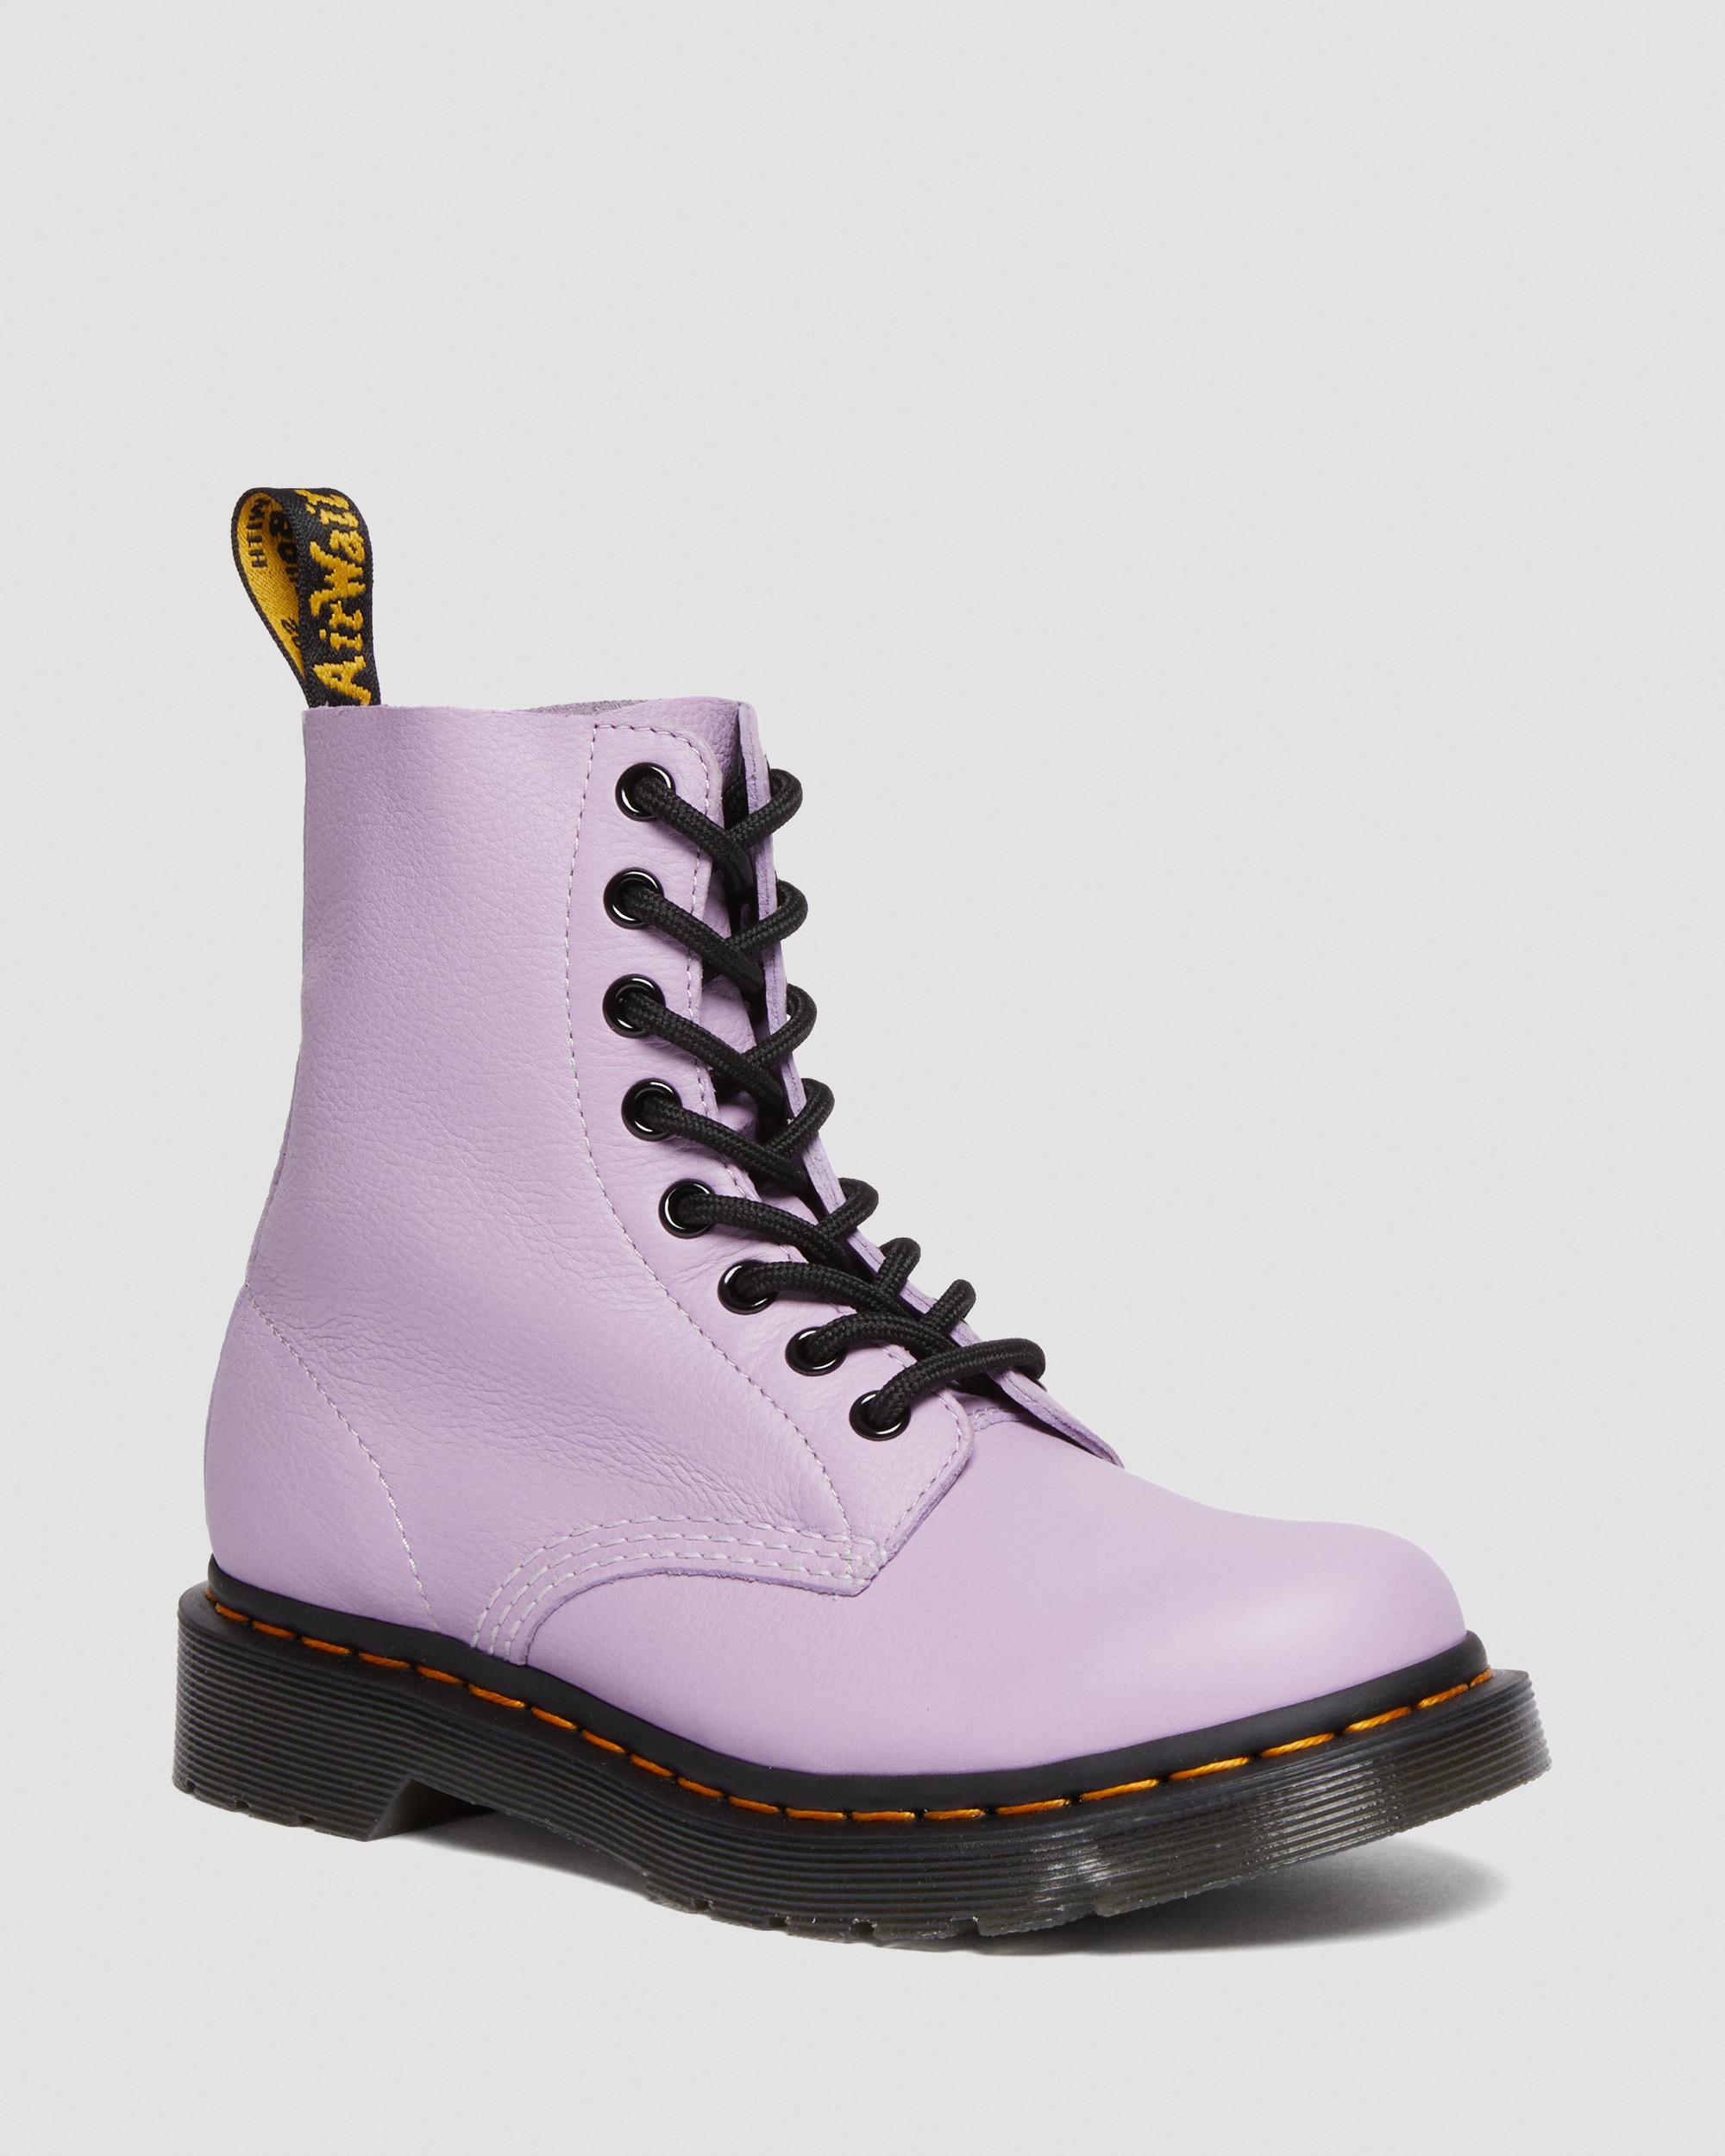 1460 Women\'s Pascal Black Eyelet Lace Up Boots in Lilac | Dr. Martens